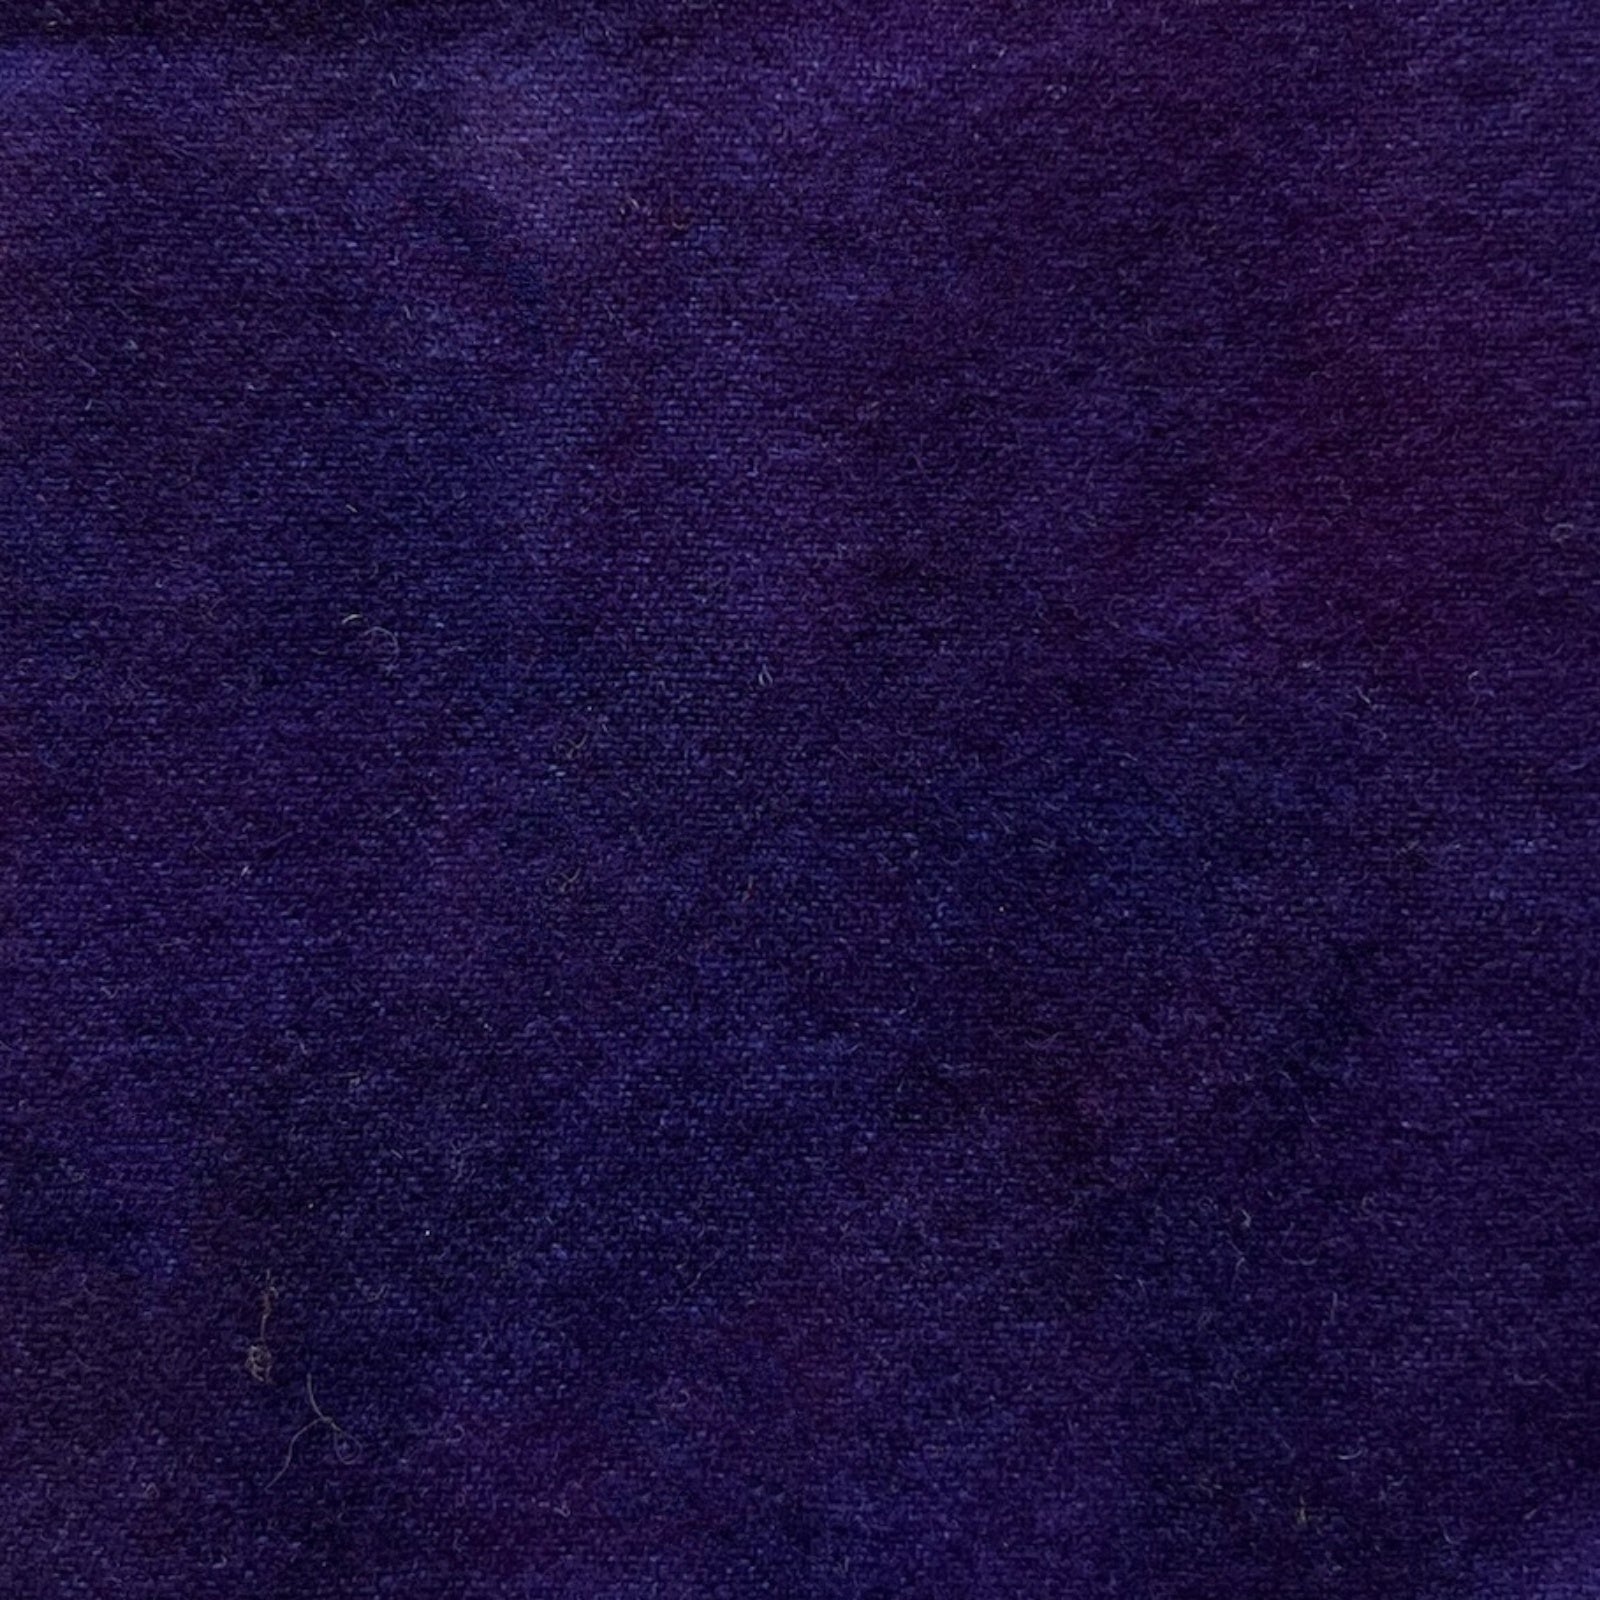 Purple Witch - Colorama Hand Dyed Wool - Offered by HoneyBee Hive Rug Hooking